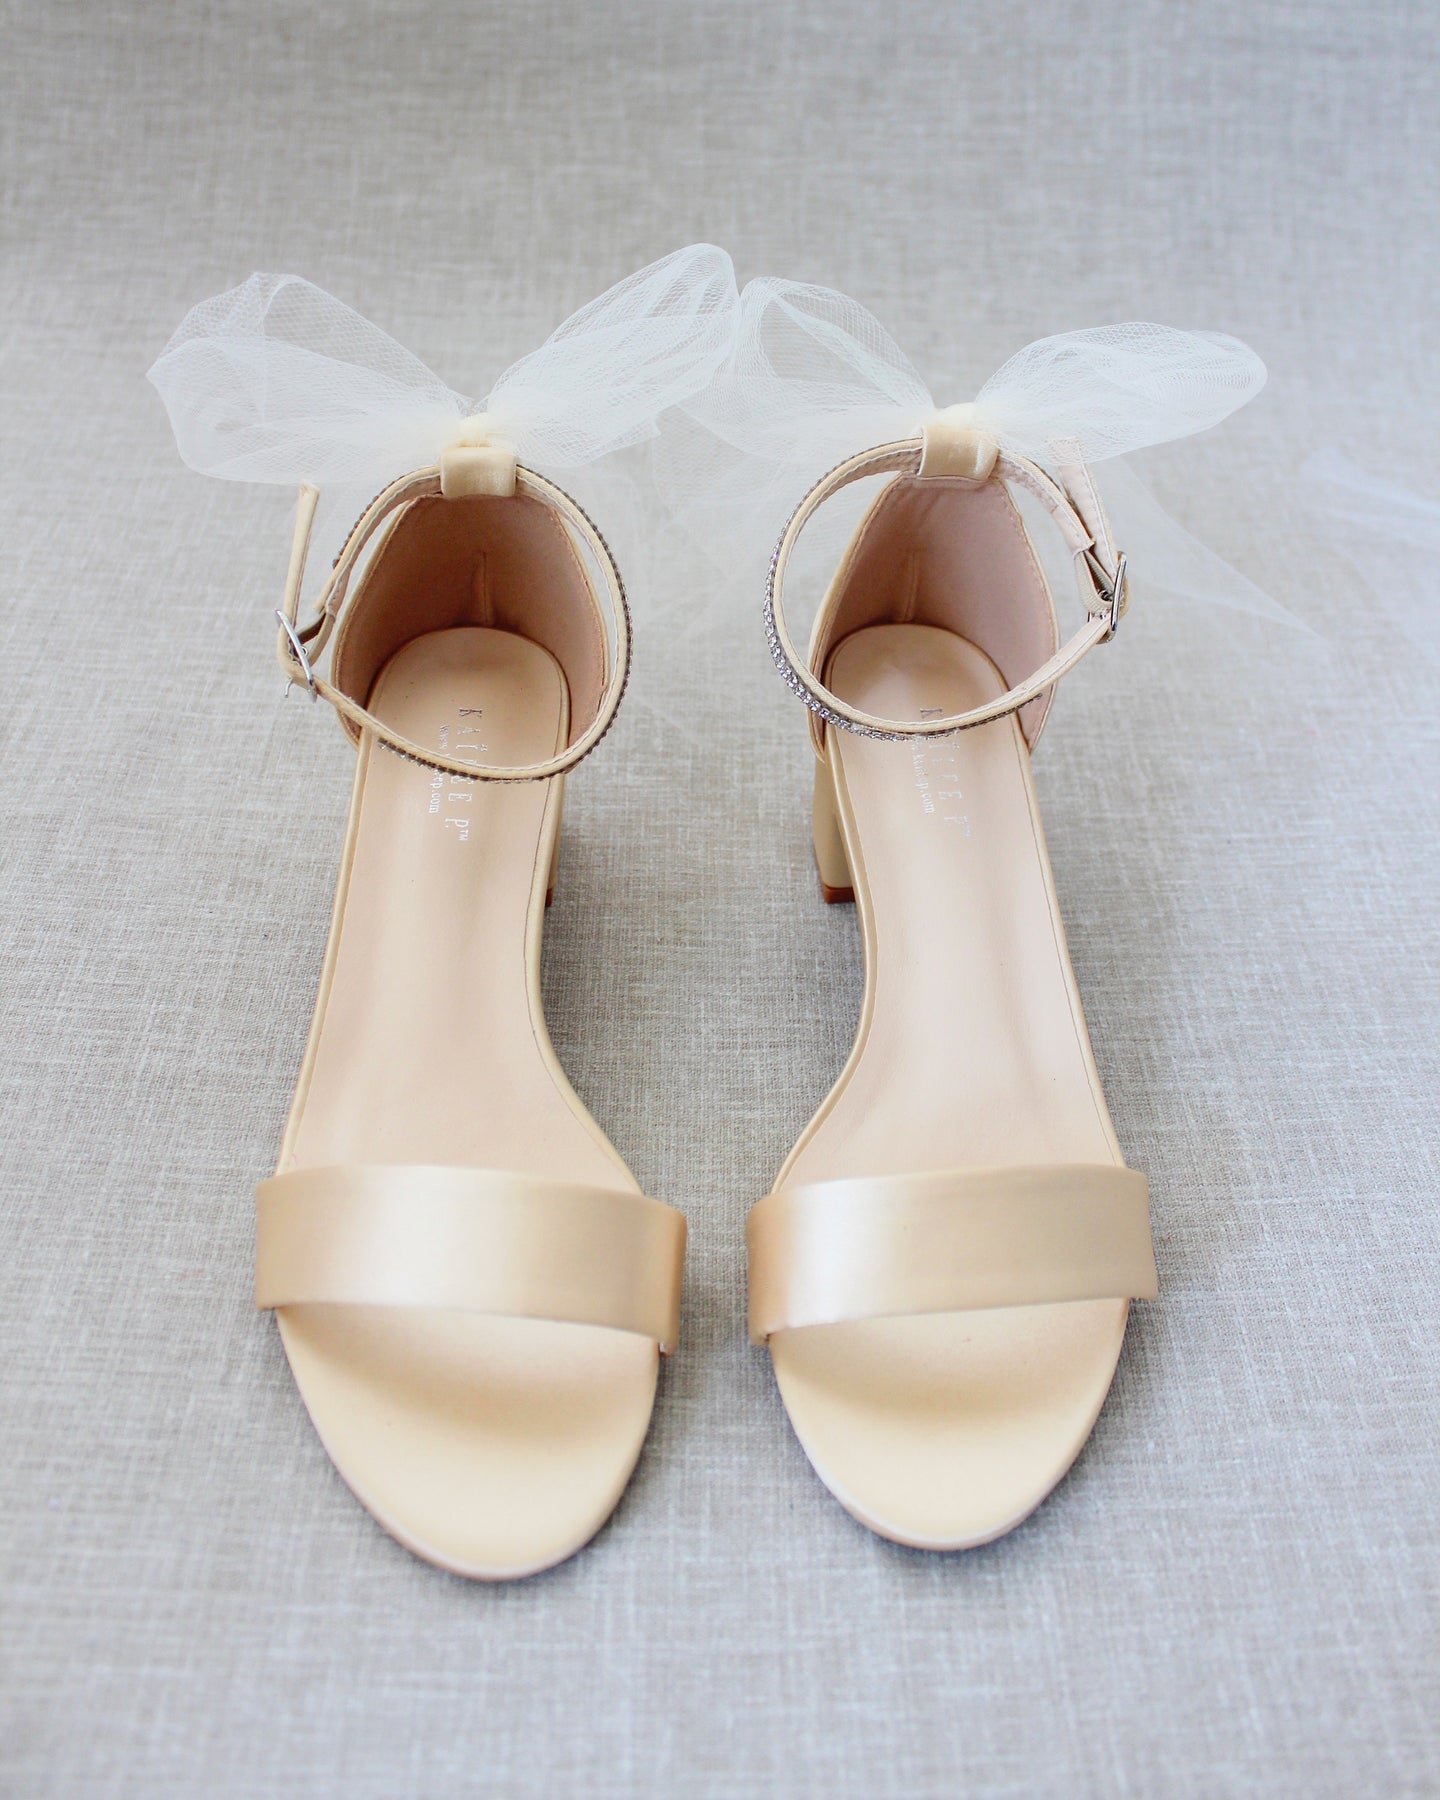 Champagne Satin Block Heel Sandals with Tulle Back Bow, Wedding Sandals ...